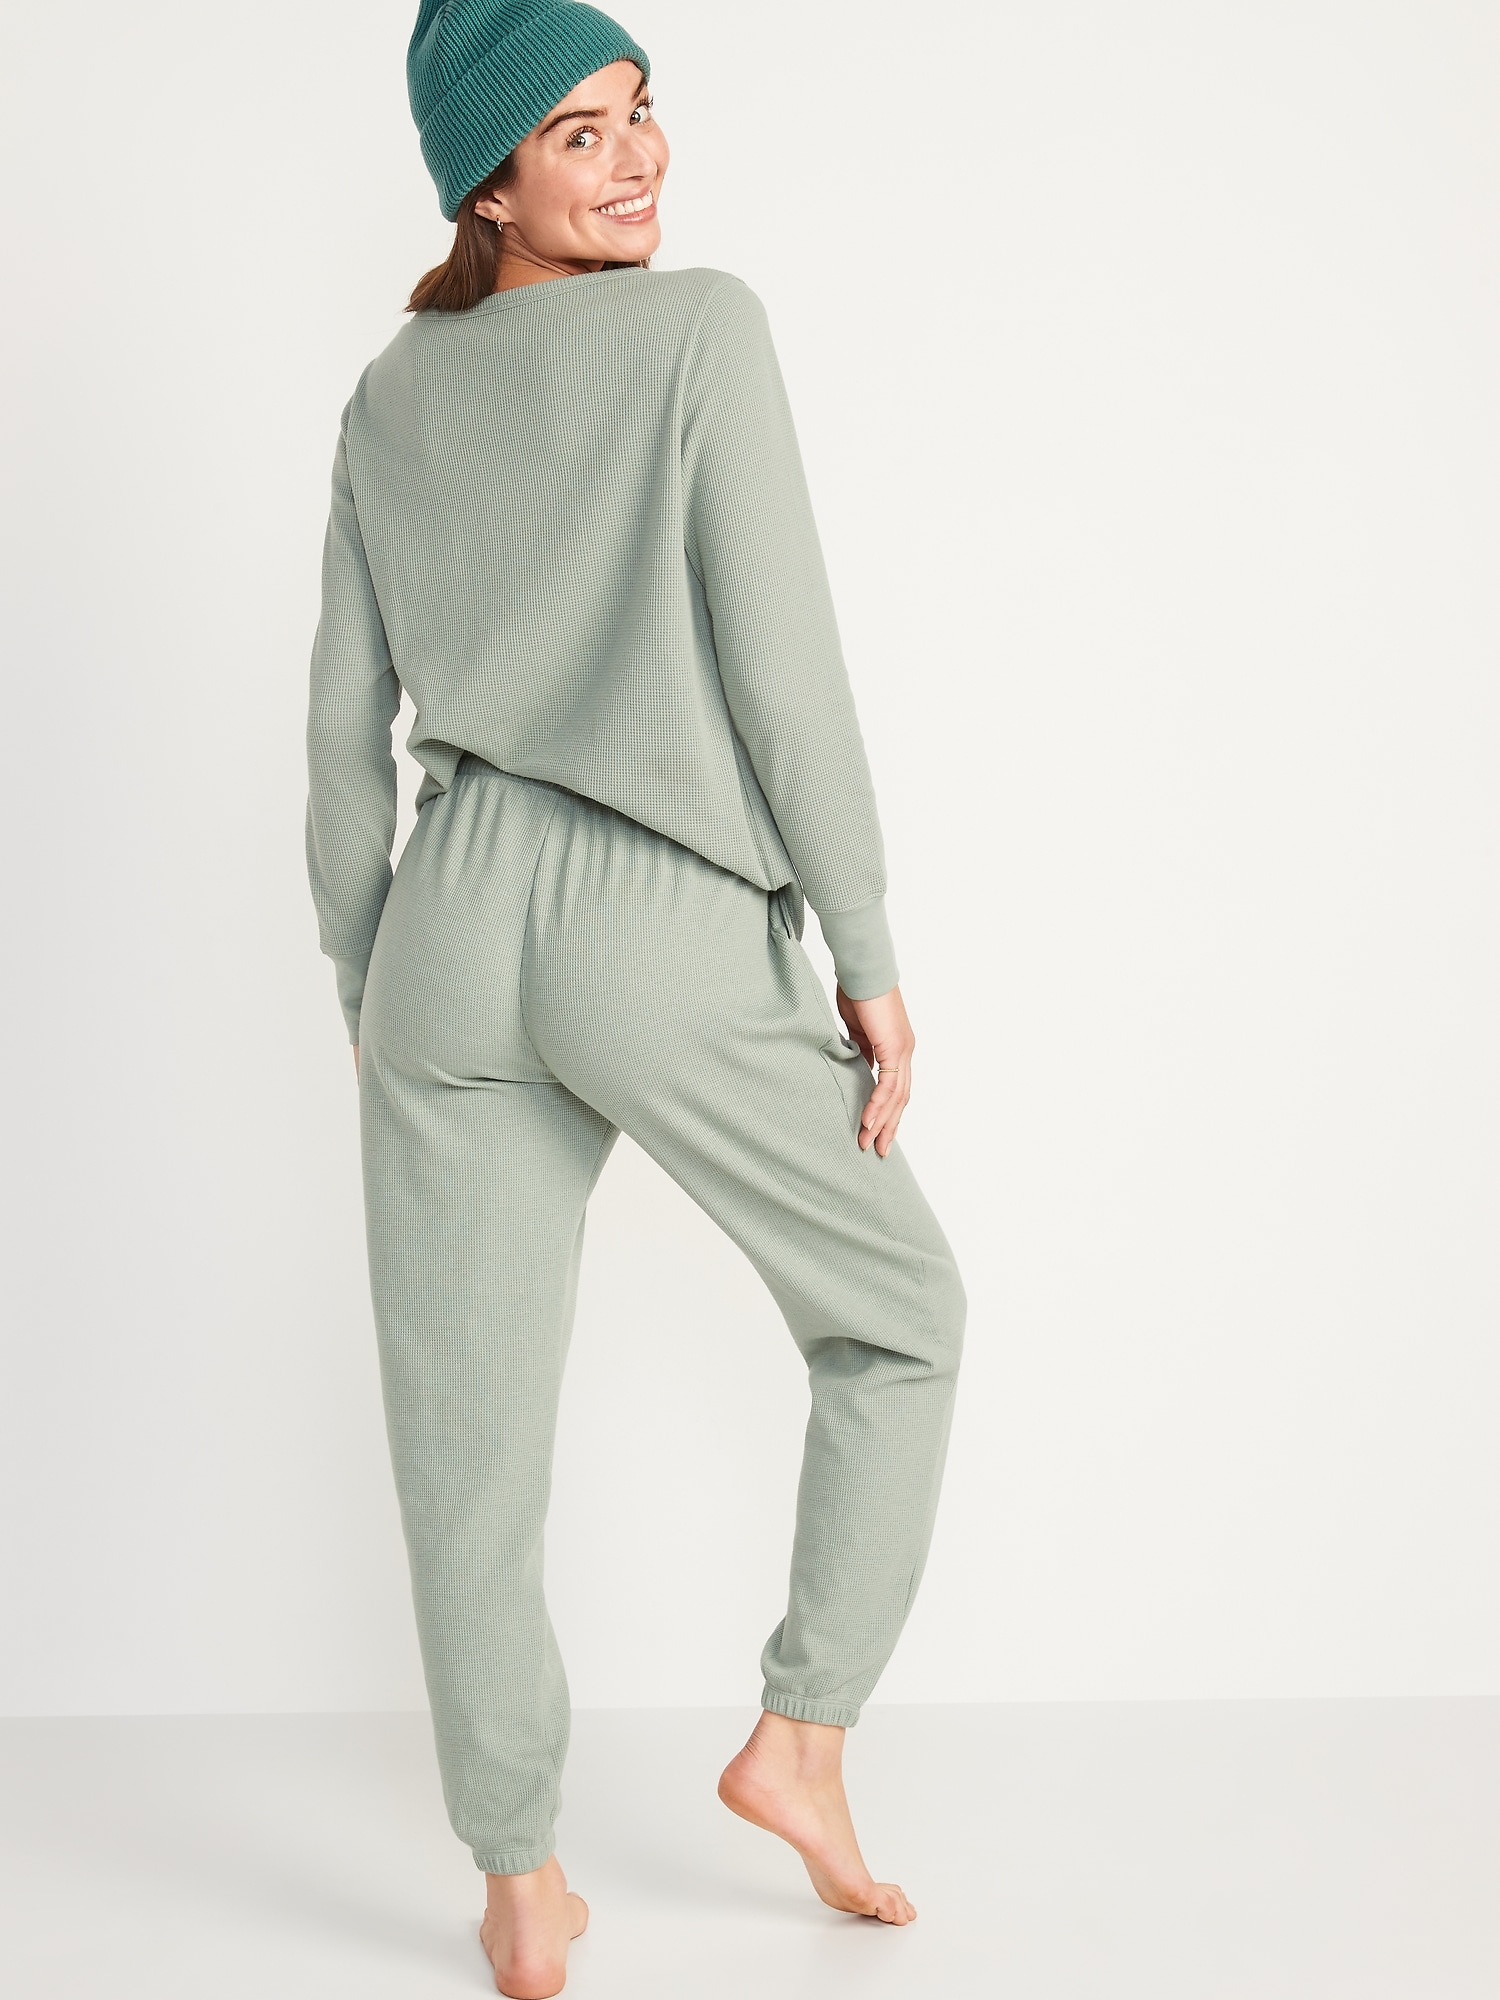 High-Waisted Thermal Jogger Lounge Pants for Women | Old Navy